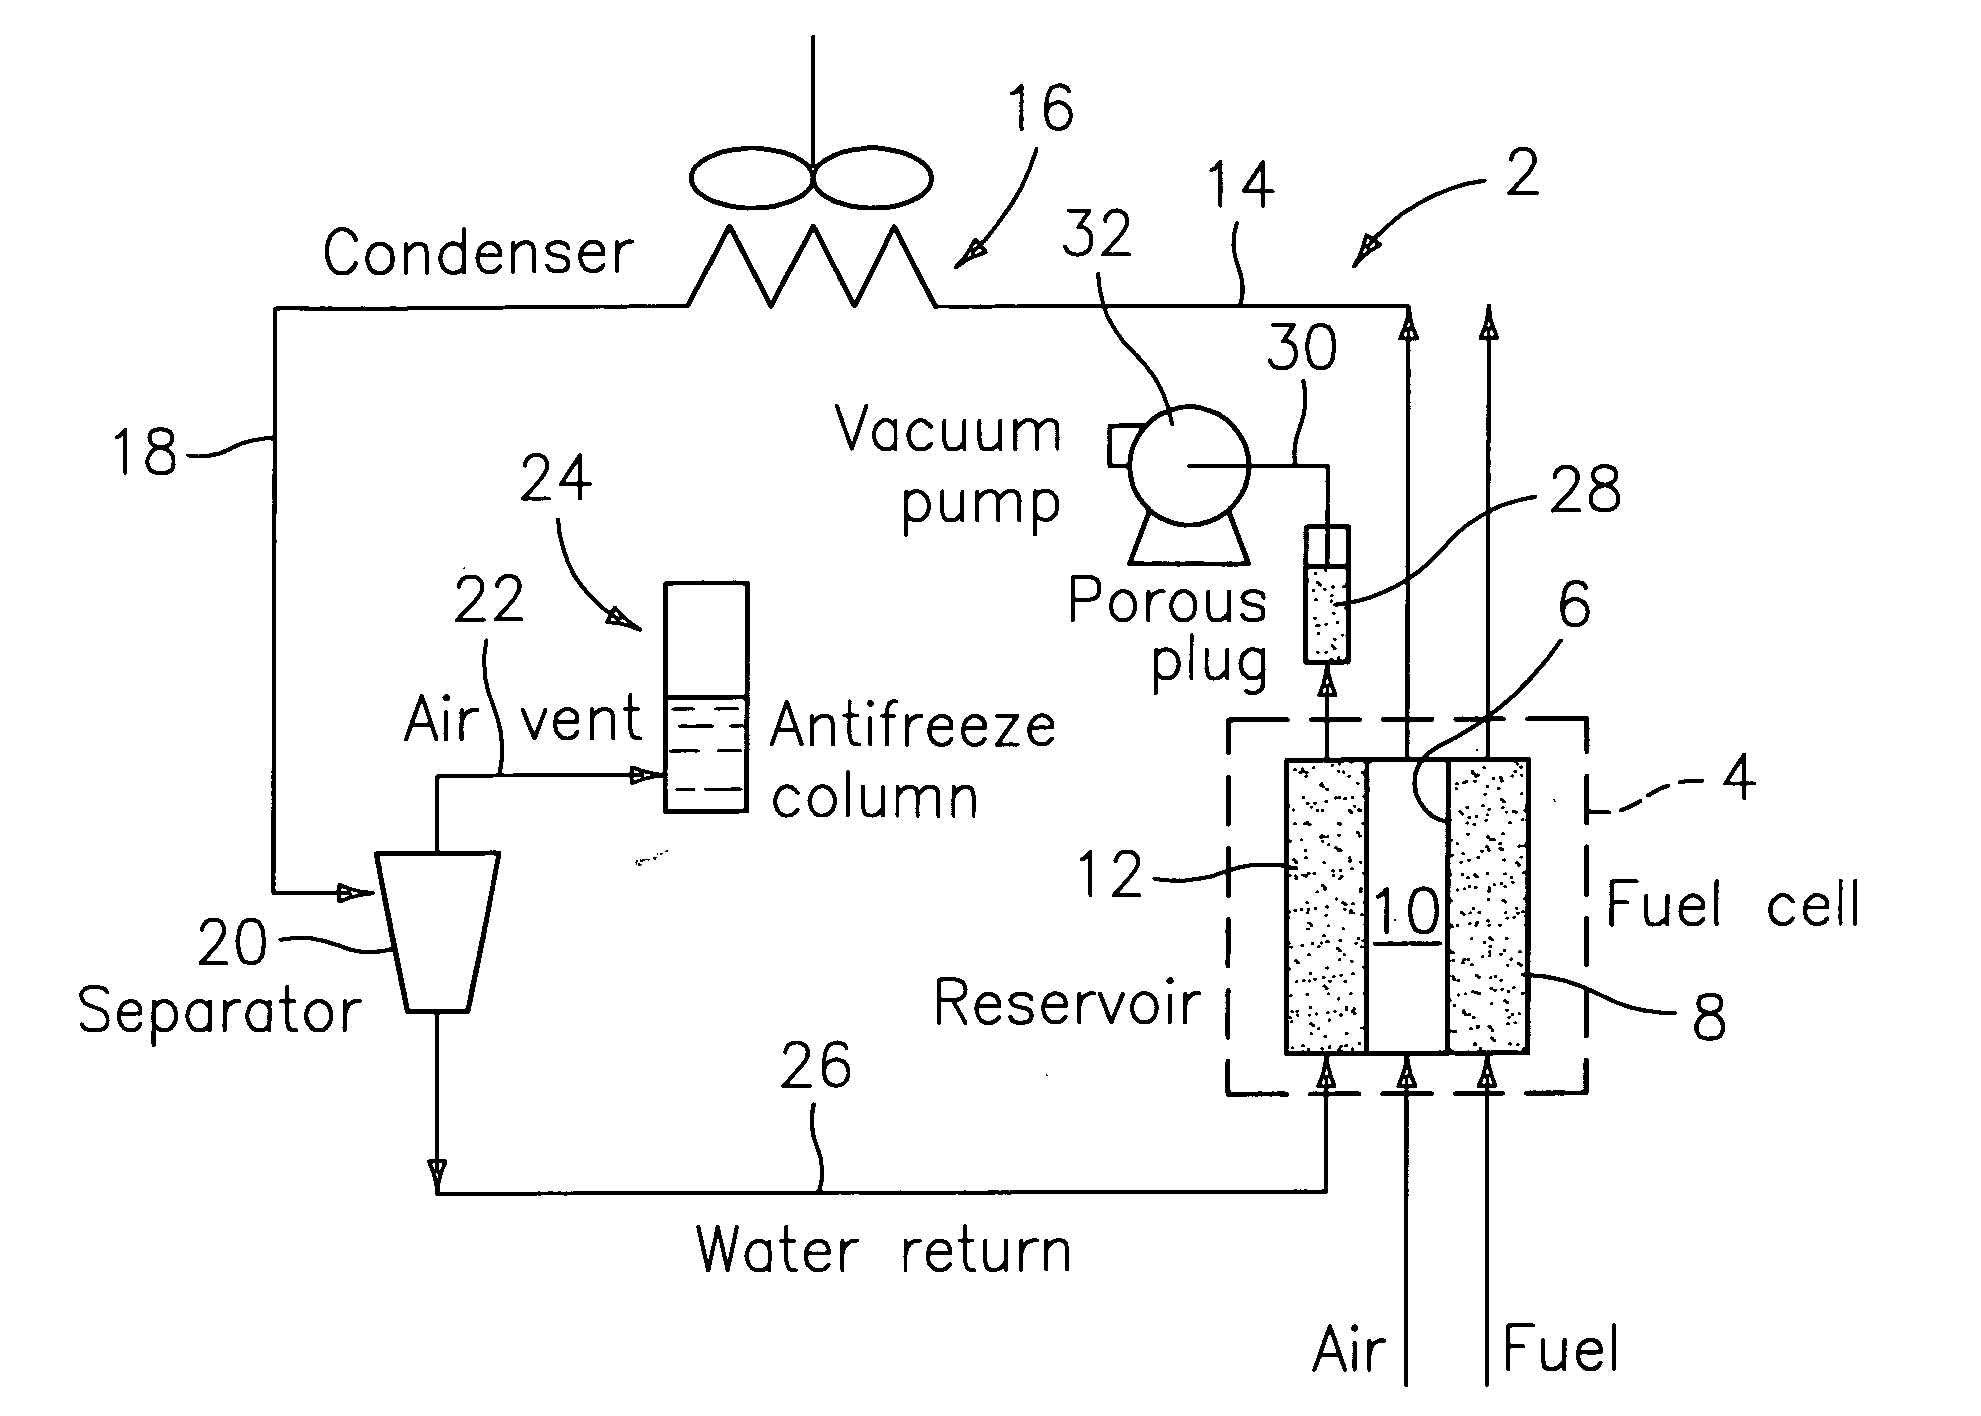 Non-circulating coolant PEM fuel cell power plant with antifreeze back pressure air venting system